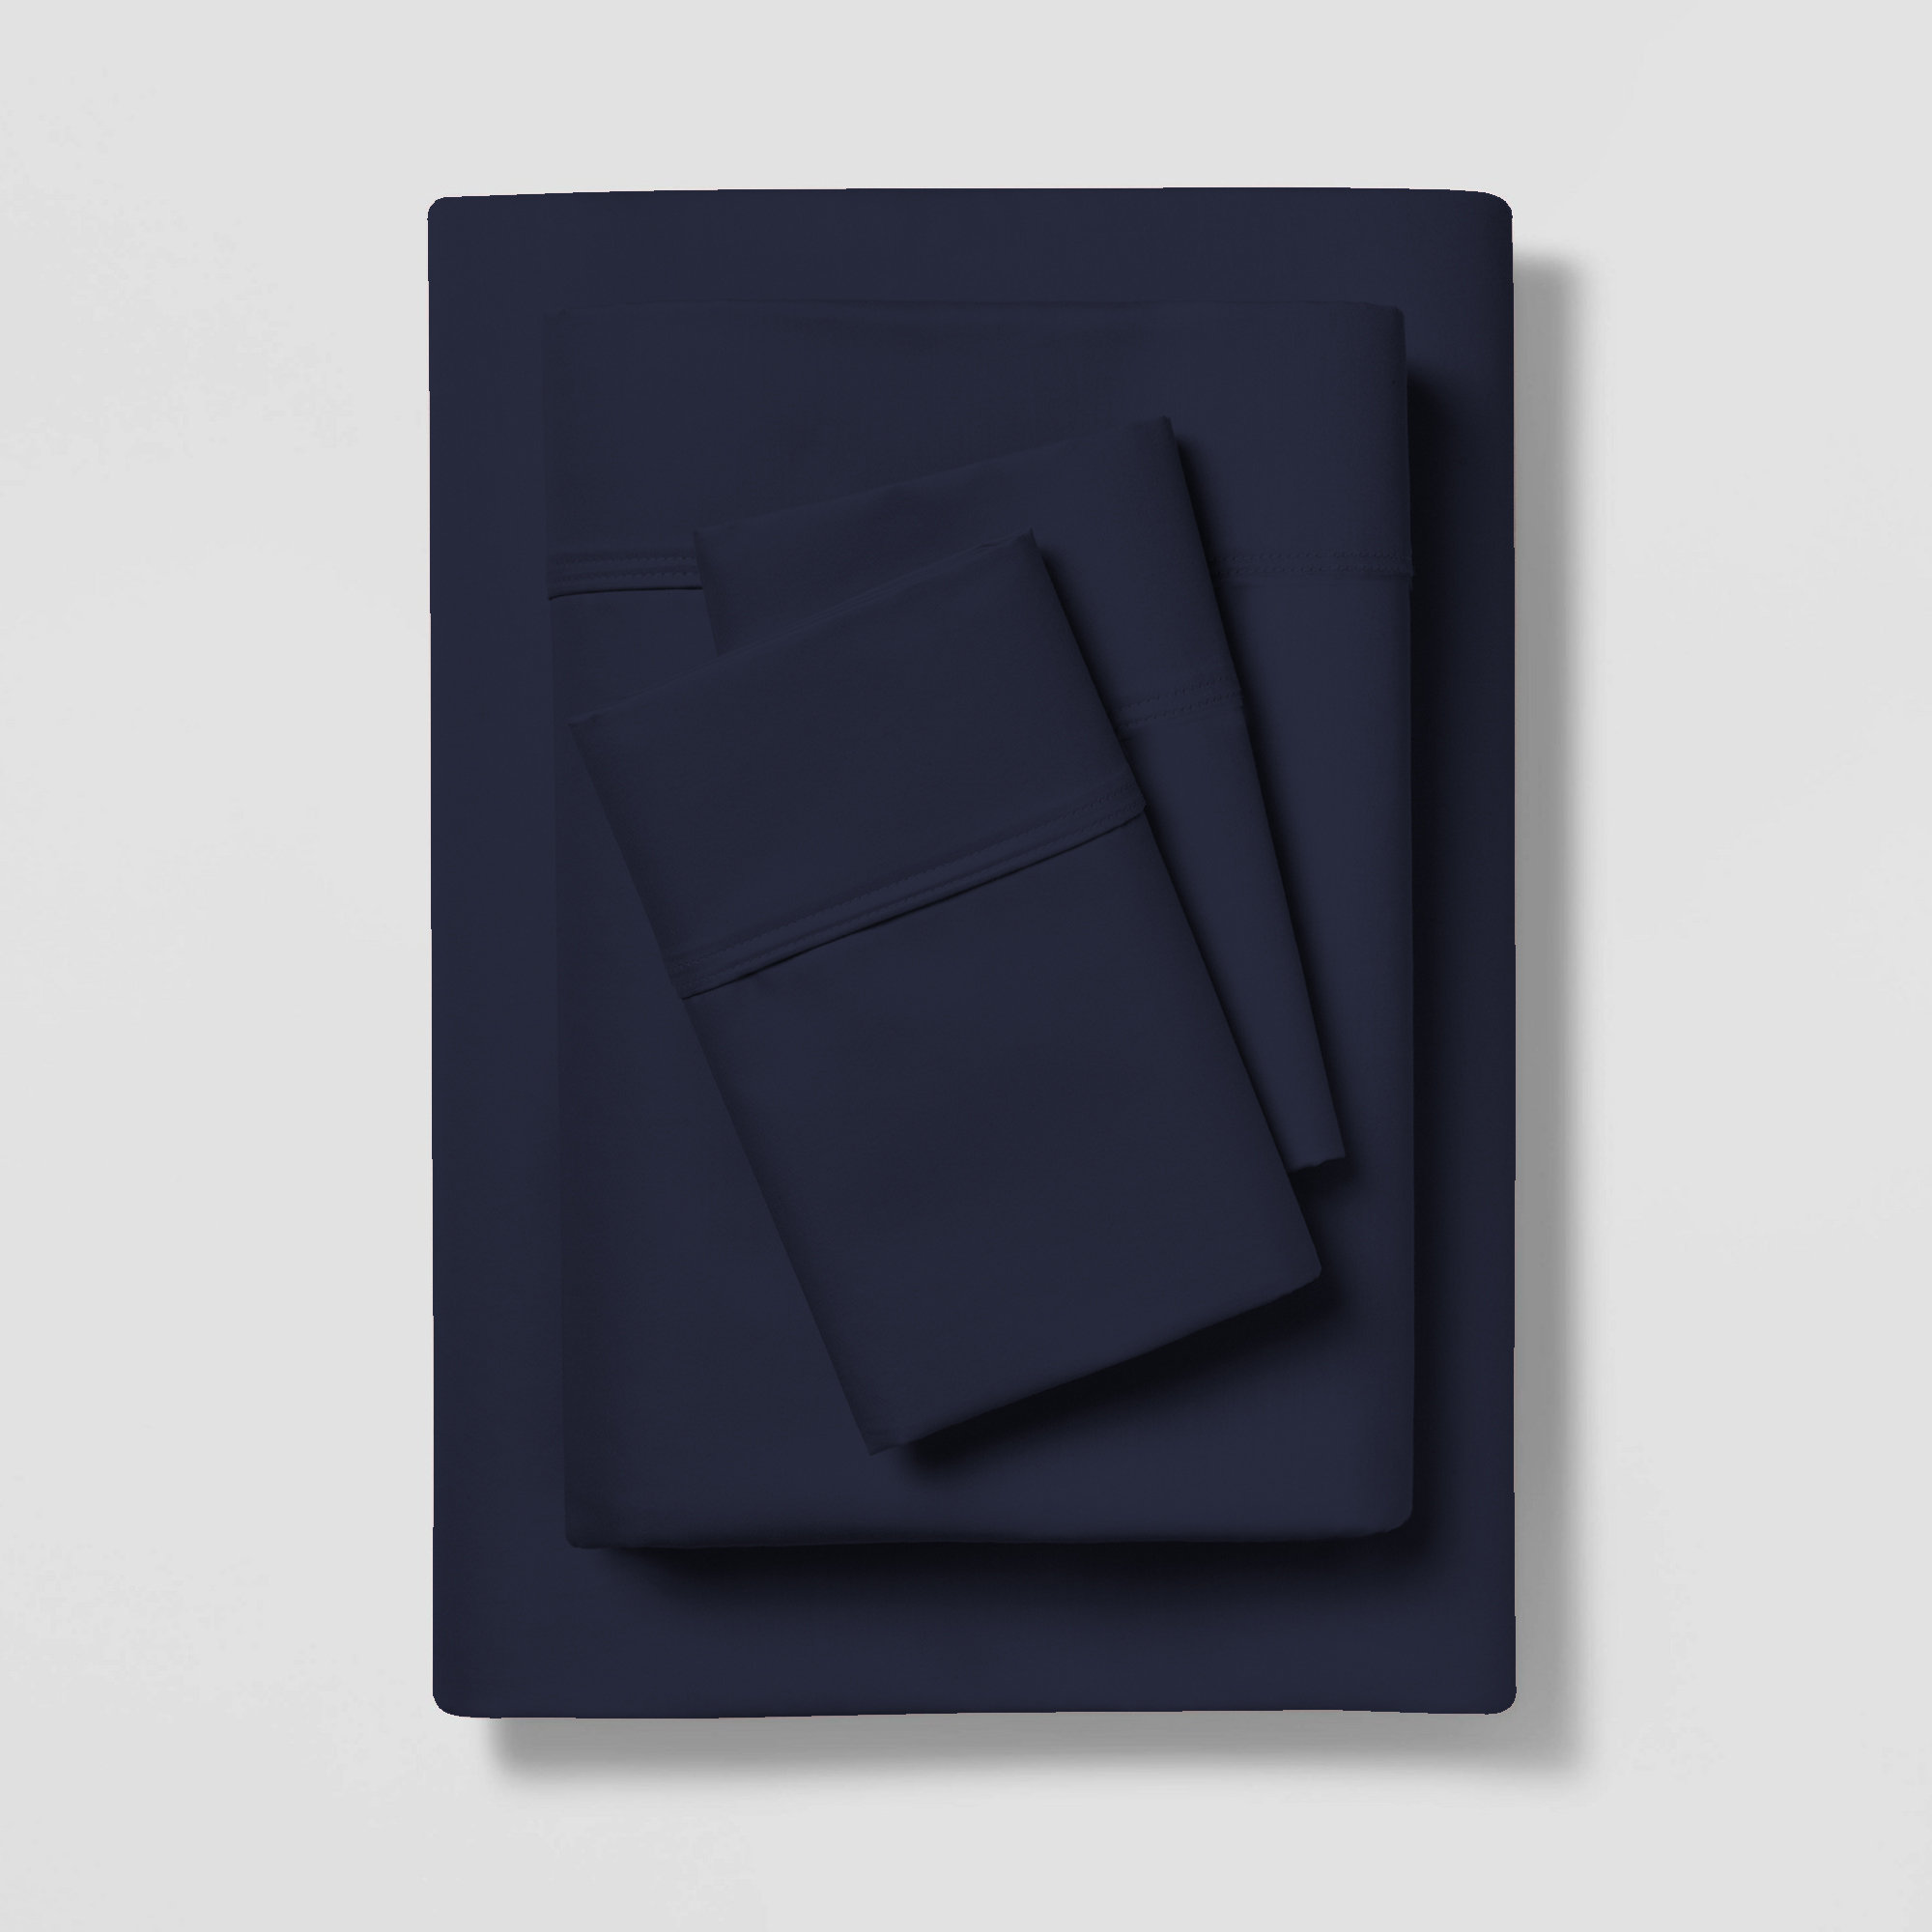 Utopia Bedding Bed Linen Set - Jersey Knit Sheets 4 Pieces Set - Cotton  Jersey Soft Stretchy Sheets (Queen, Navy)